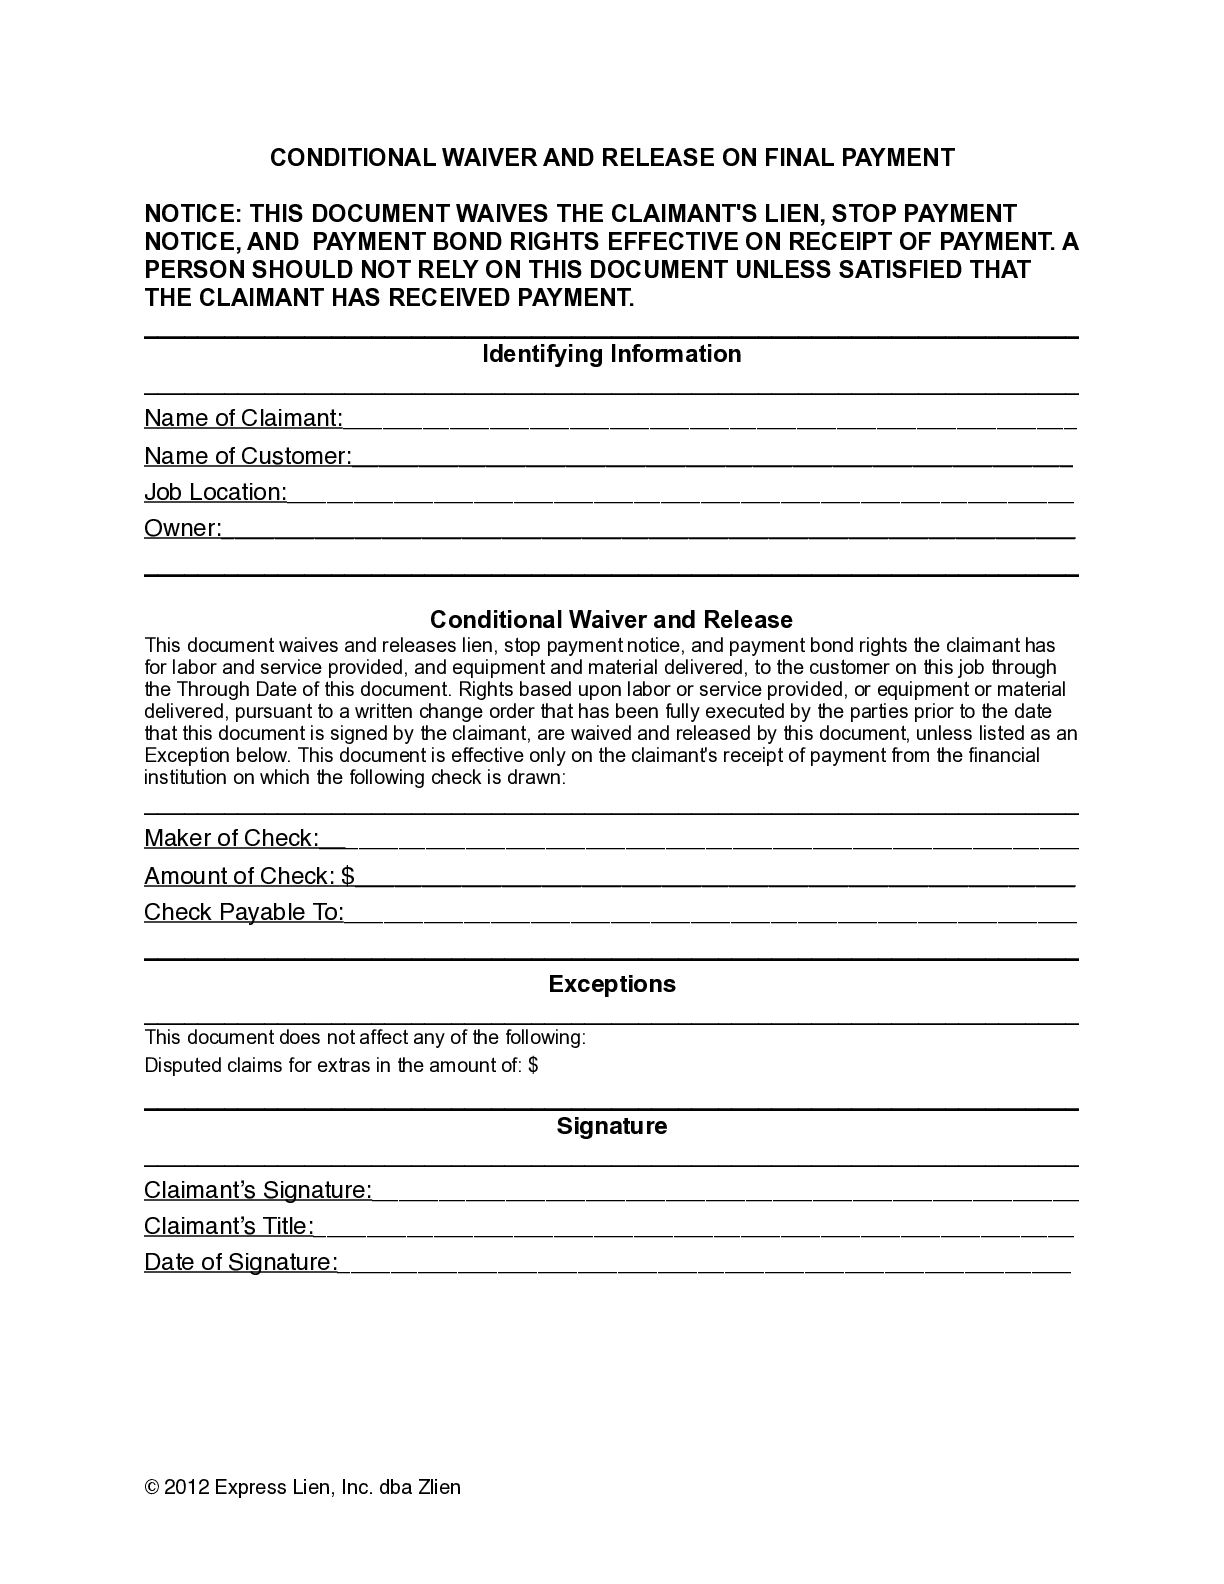 Delaware Final Conditional Lien Waiver Form - free from